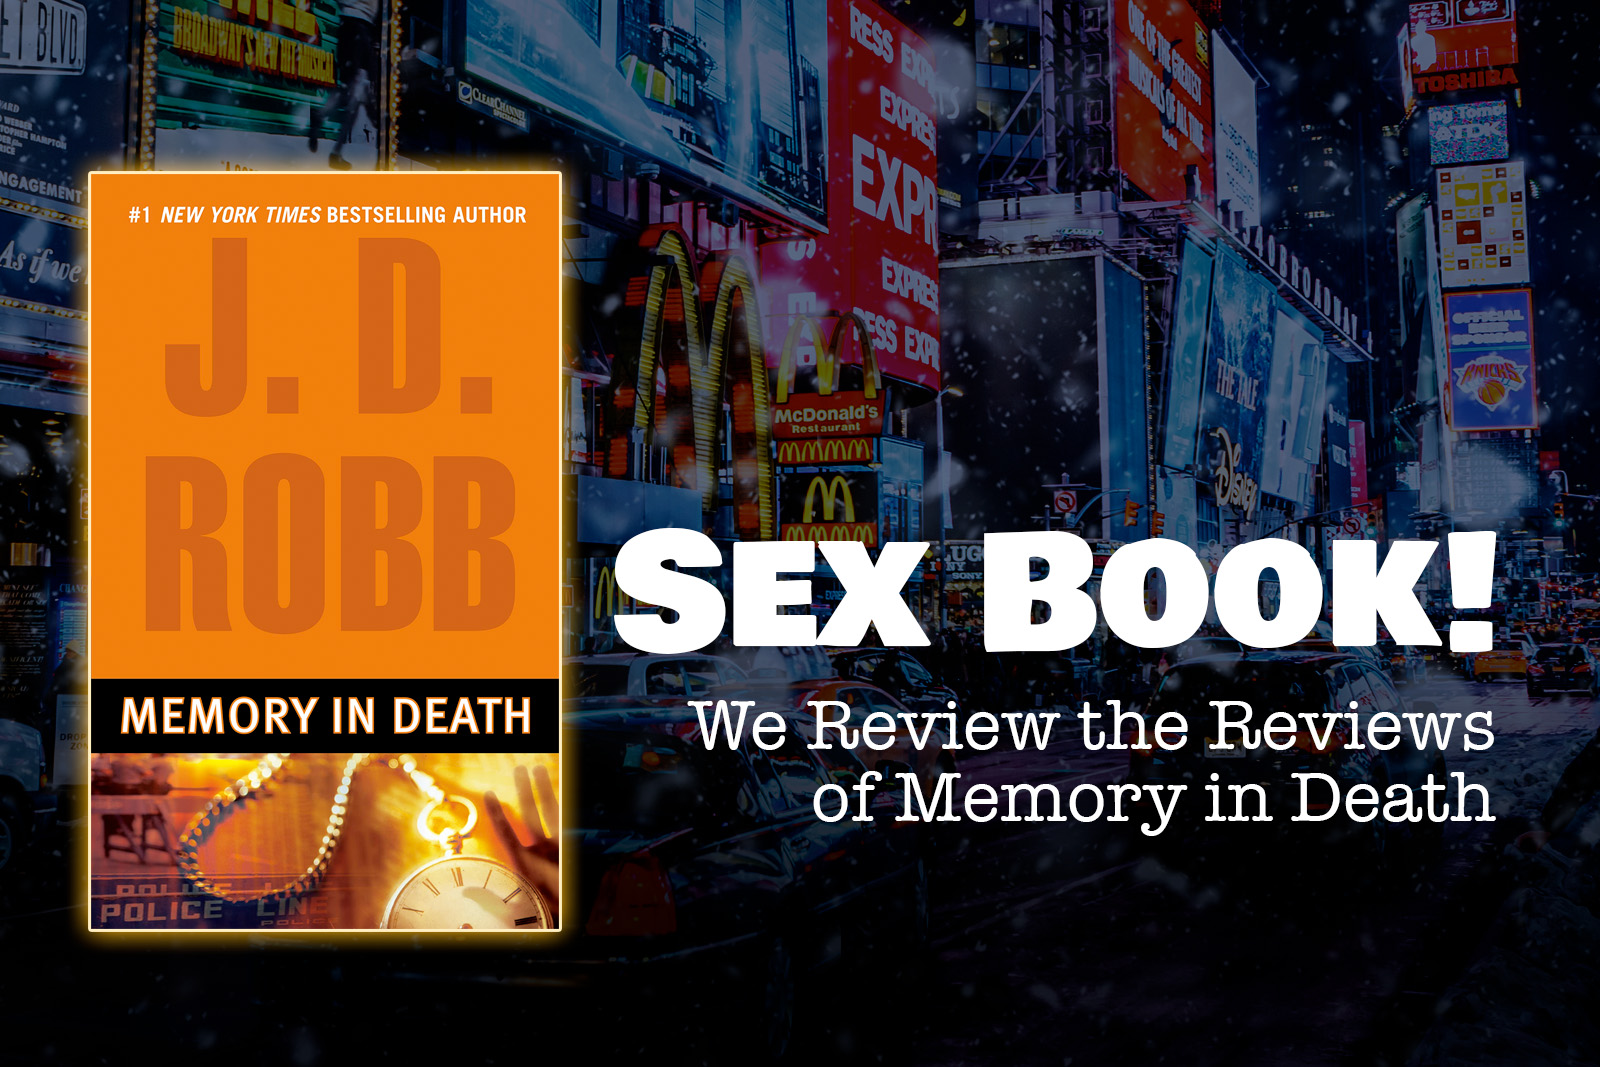 Sex Book! We Review the Reviews of “Memory in Death”